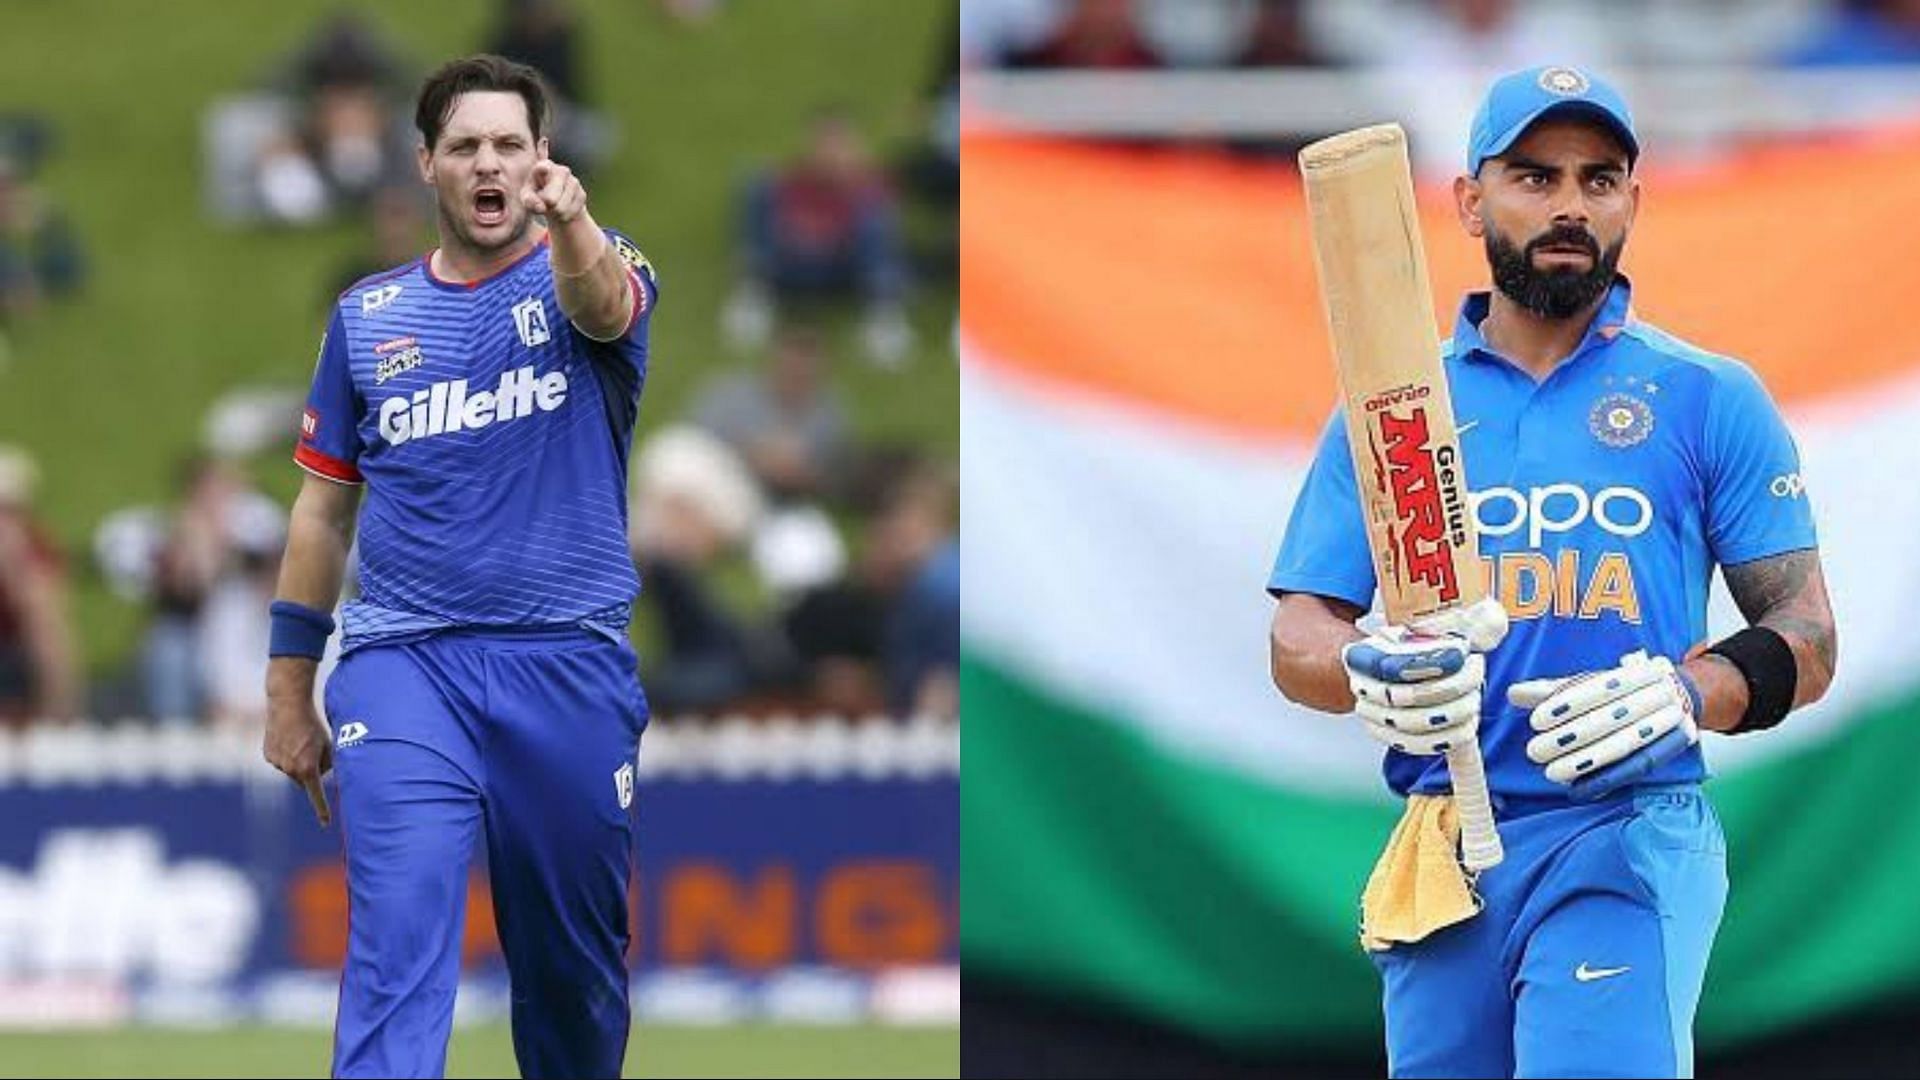 Former New Zealand fast bowler Mitchell McClenaghan played a lot of cricket against Virat Kohli (Image: Getty)